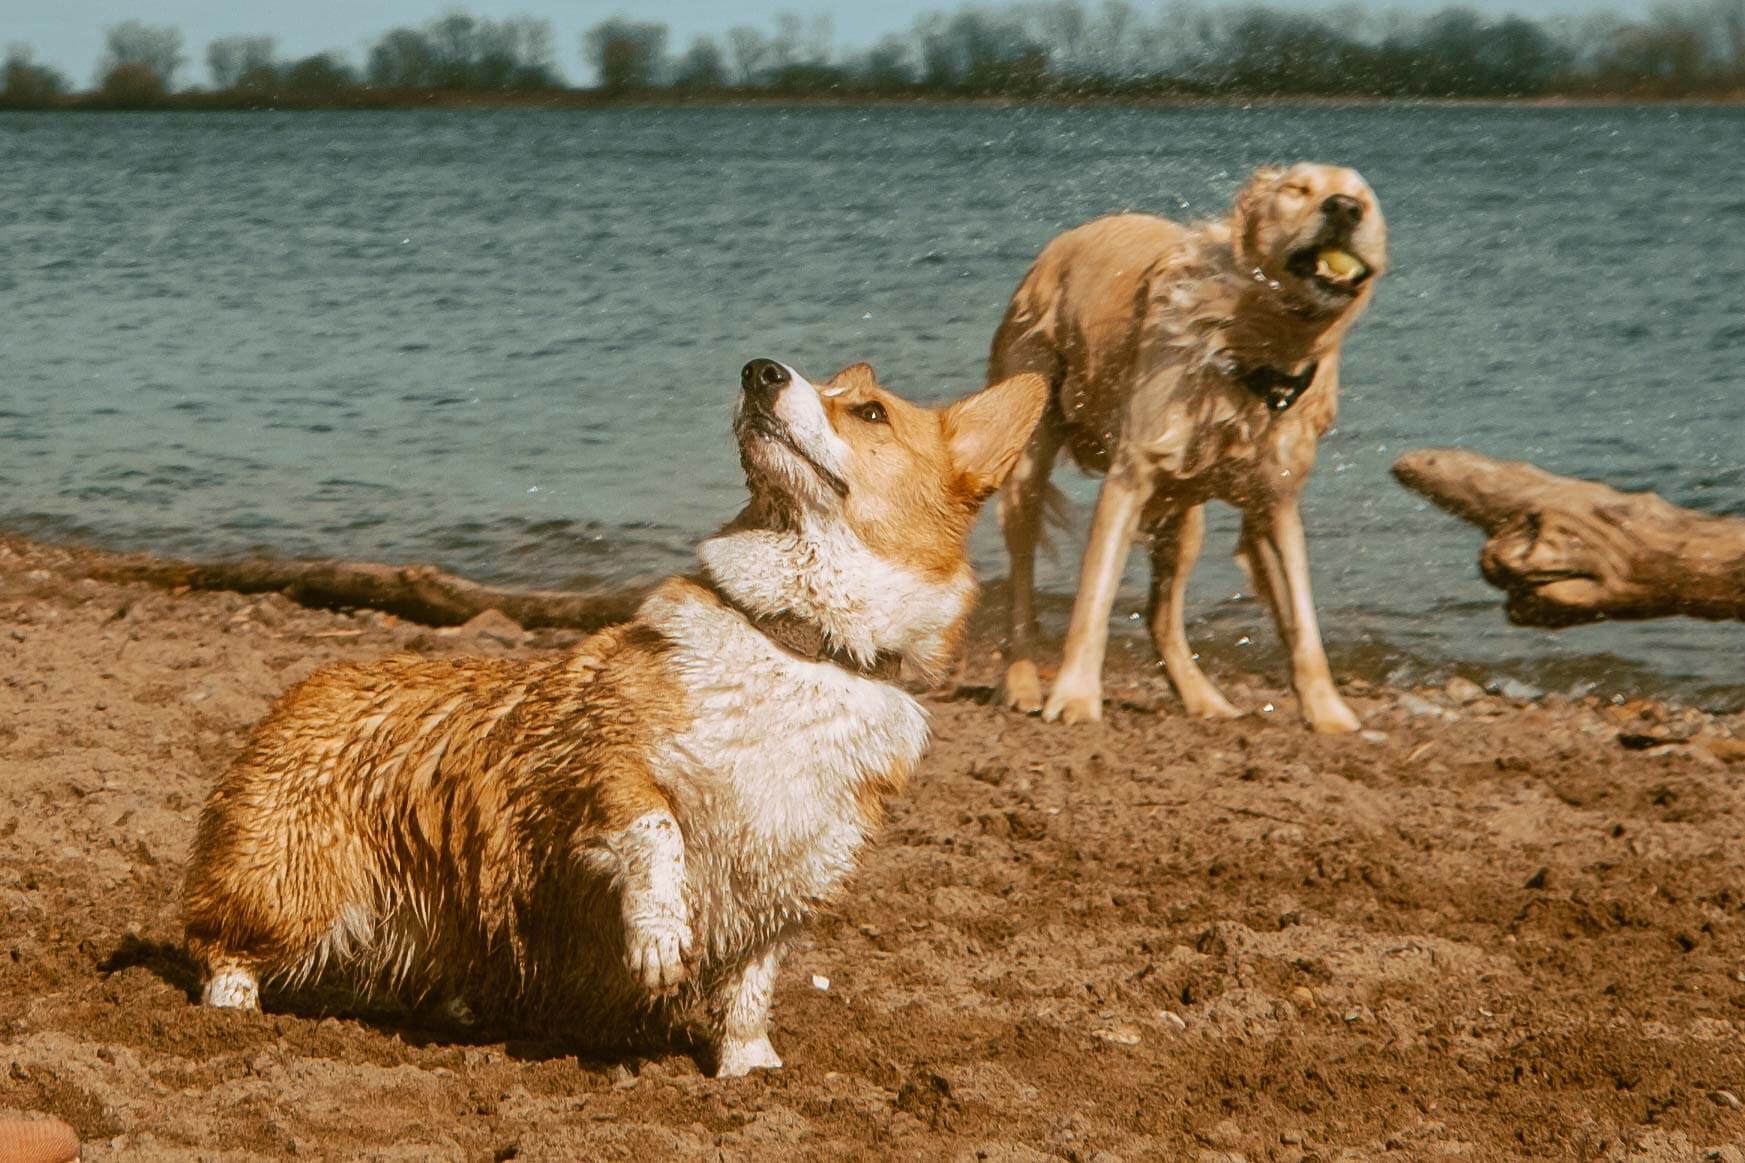 Limone, a red and white corgi is lifting her front paw up in anticipation. She is wet and covered in sand. In the background is another dog - possibly a golden retriever, who is also wet. The other dog is holding a ball in its mouth while shaking wet fur. 